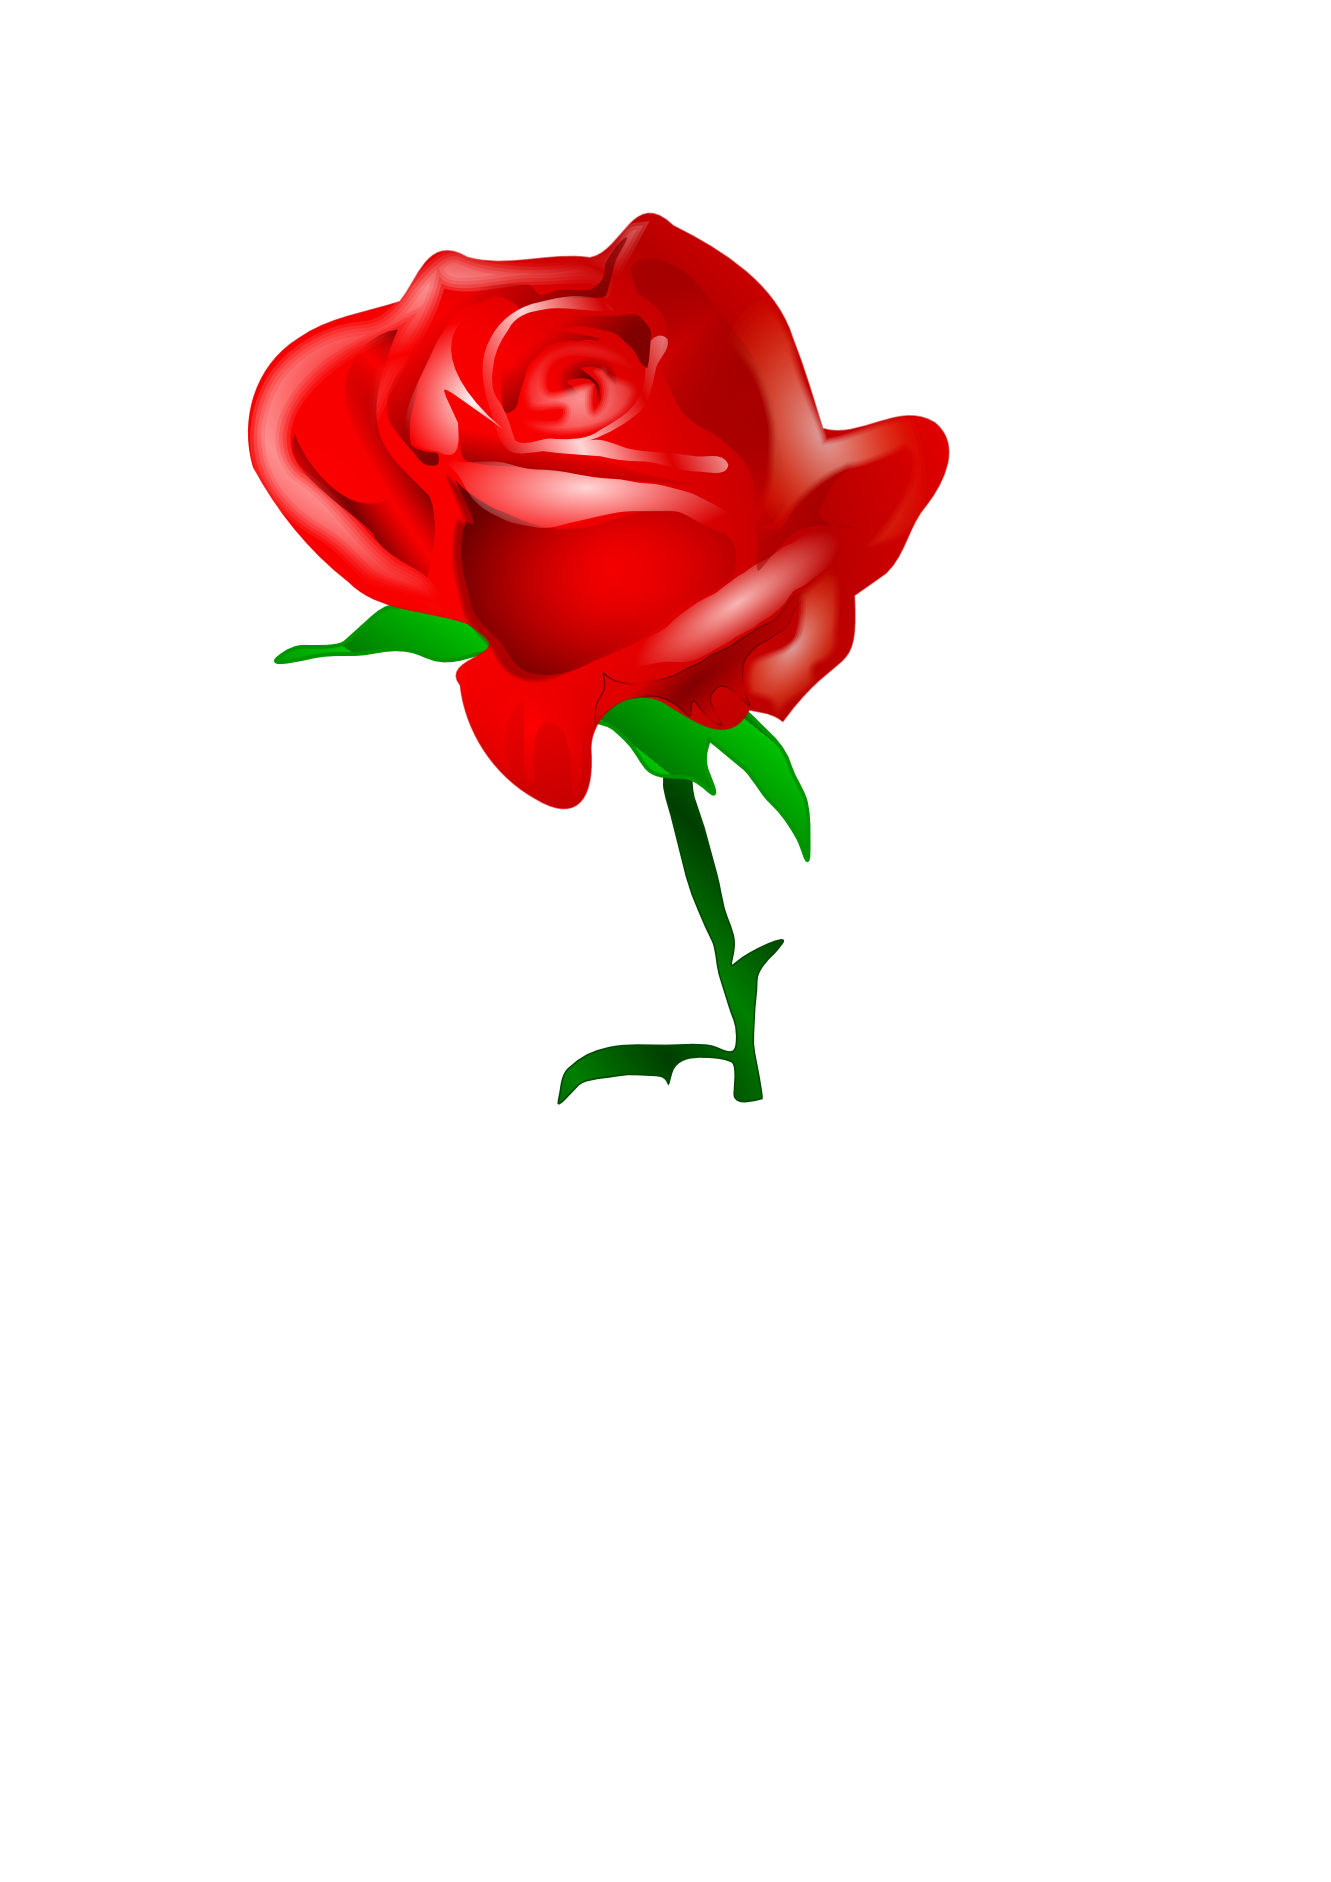 clipart images of red roses - photo #9